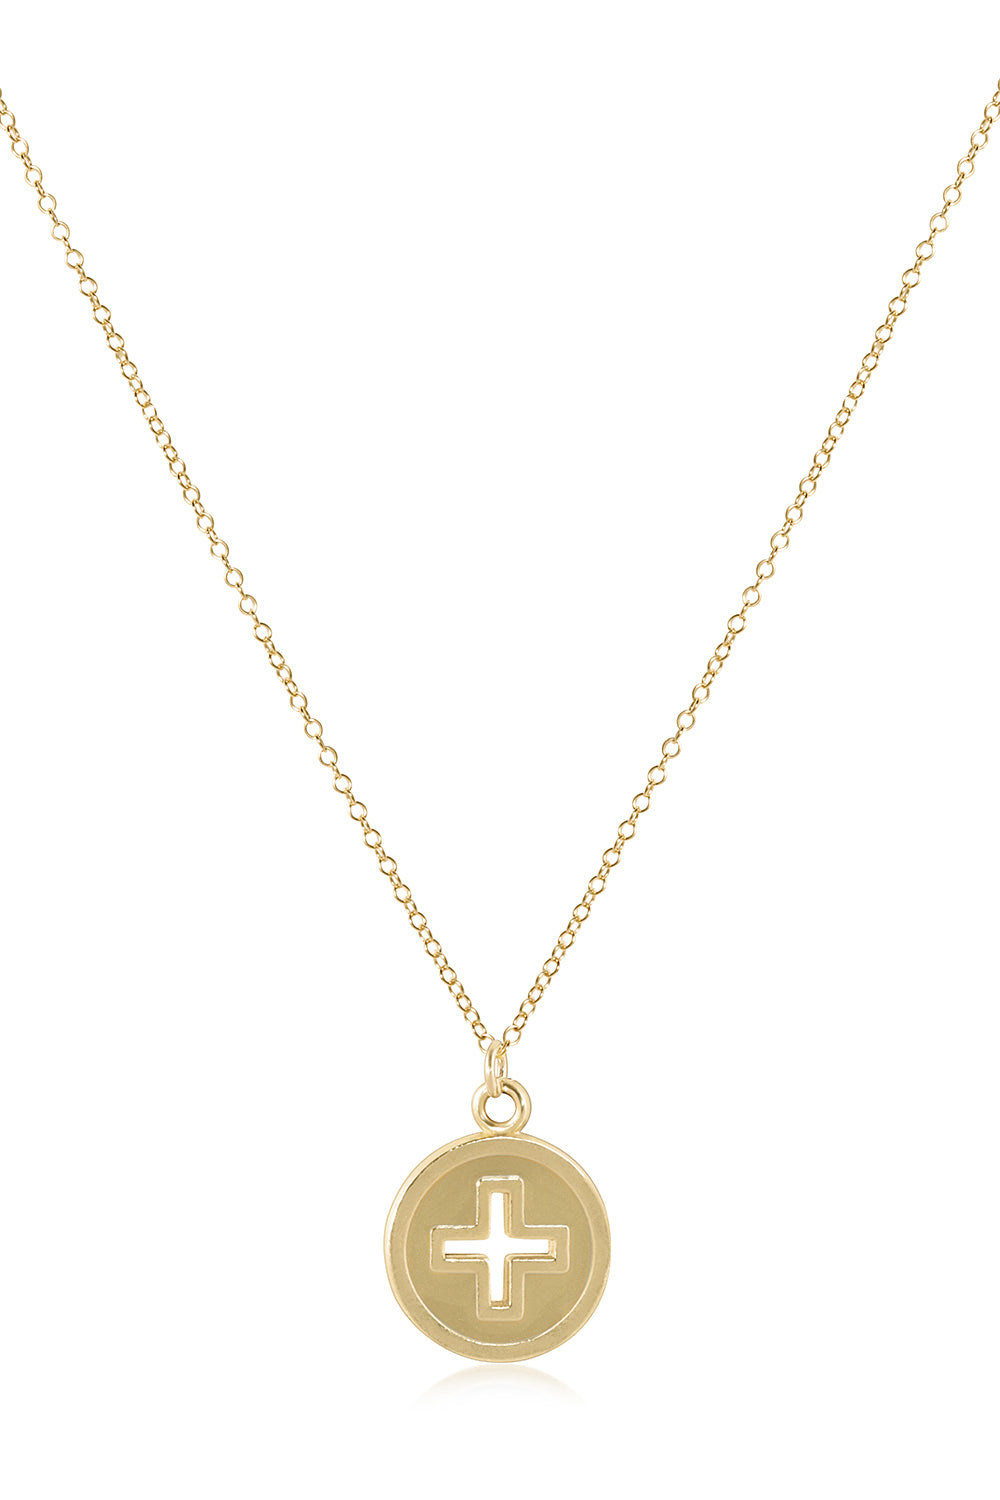 EN Classic Necklace with Signature Cross Disc - Gold